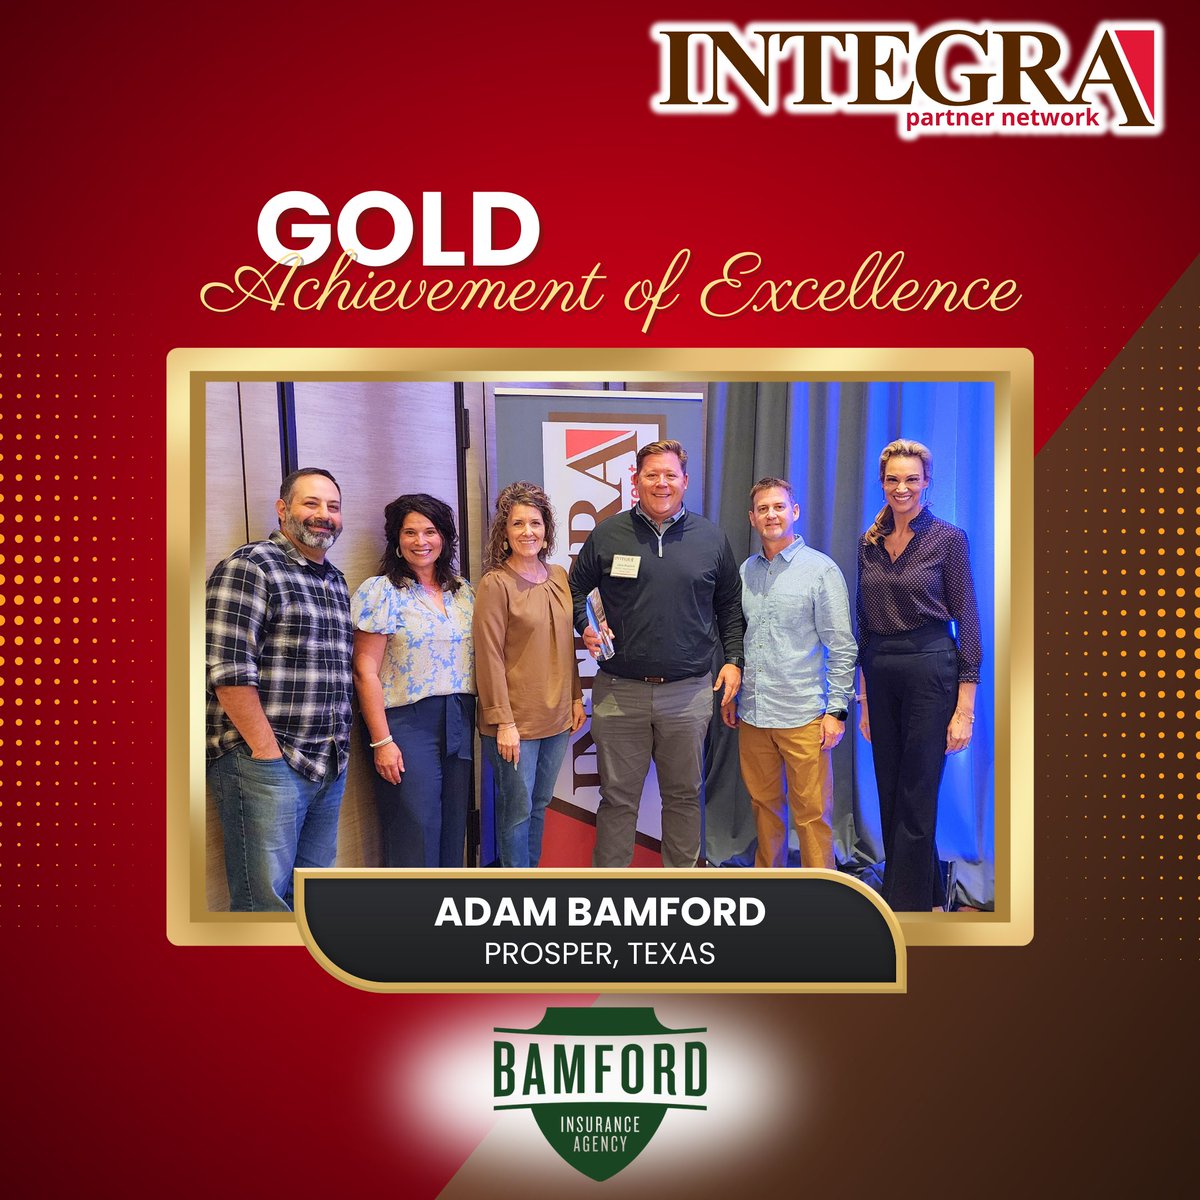 Congratulations to Adam Bamford, owner of Bamford Insurance Agency in Prosper, Texas, our Integra Partner Network Gold Achievement of Excellence award winner.

#integra #agencygroup #independentagent #independentagency #insurance #insuranceagent #insuranceagency #findyourway